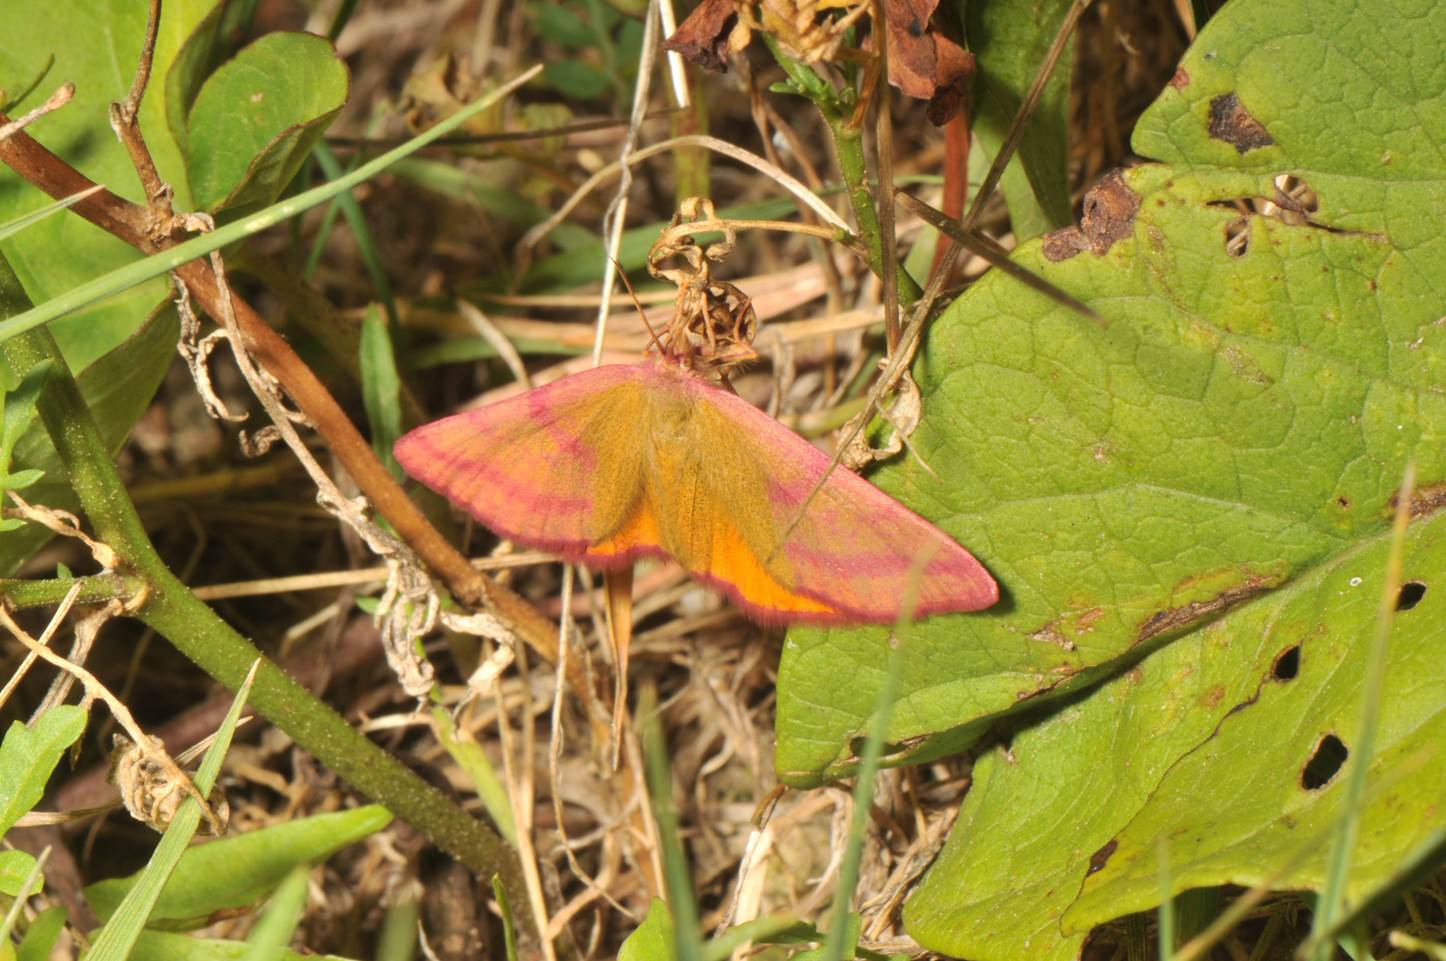 A pink and orange moth on a leaf

Description automatically generated